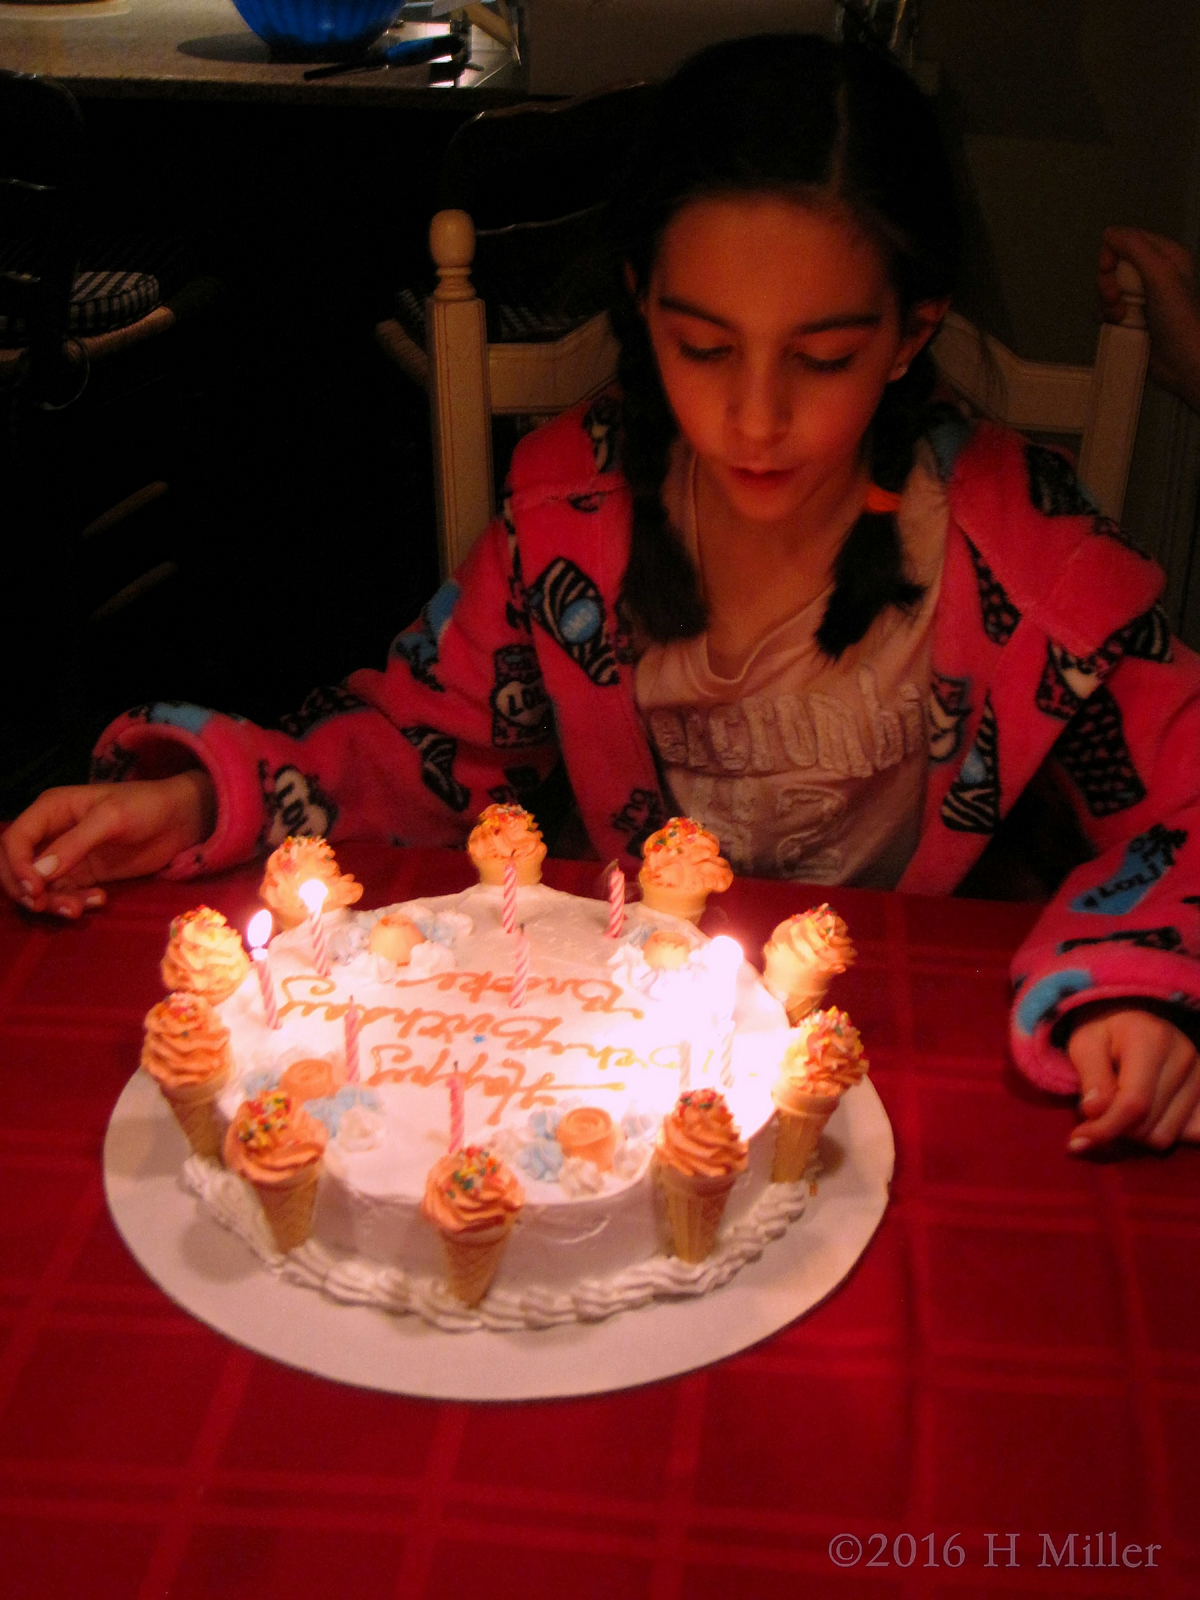 She Blows Out The Candles! 